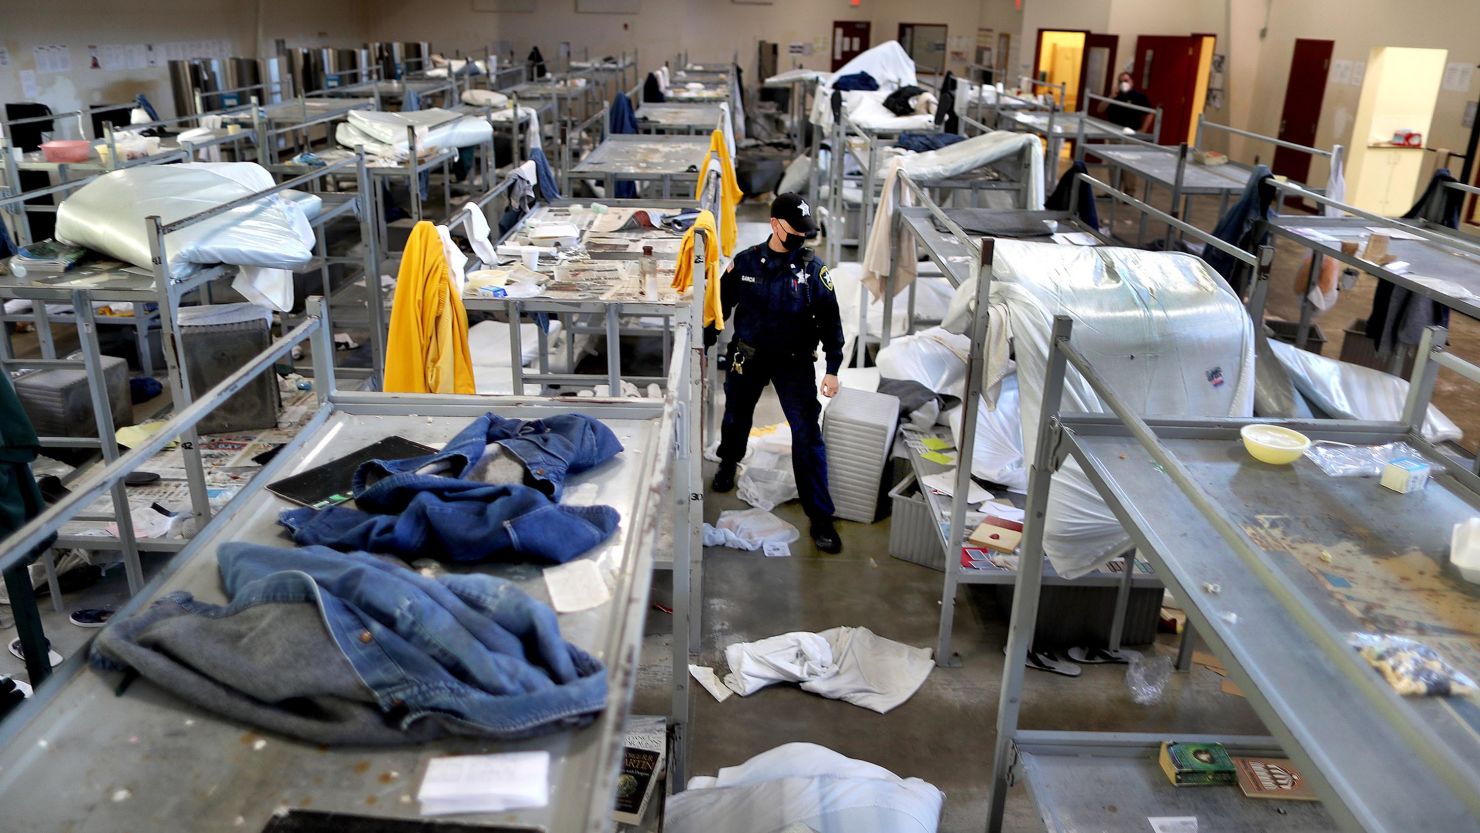 Bristol County Sheriff's Department Corrections officer Marie Garcia, an 18-year veteran, walks through rows of bunk beds in disarray in Dartmouth, Massachusetts, on May 2, 2020.